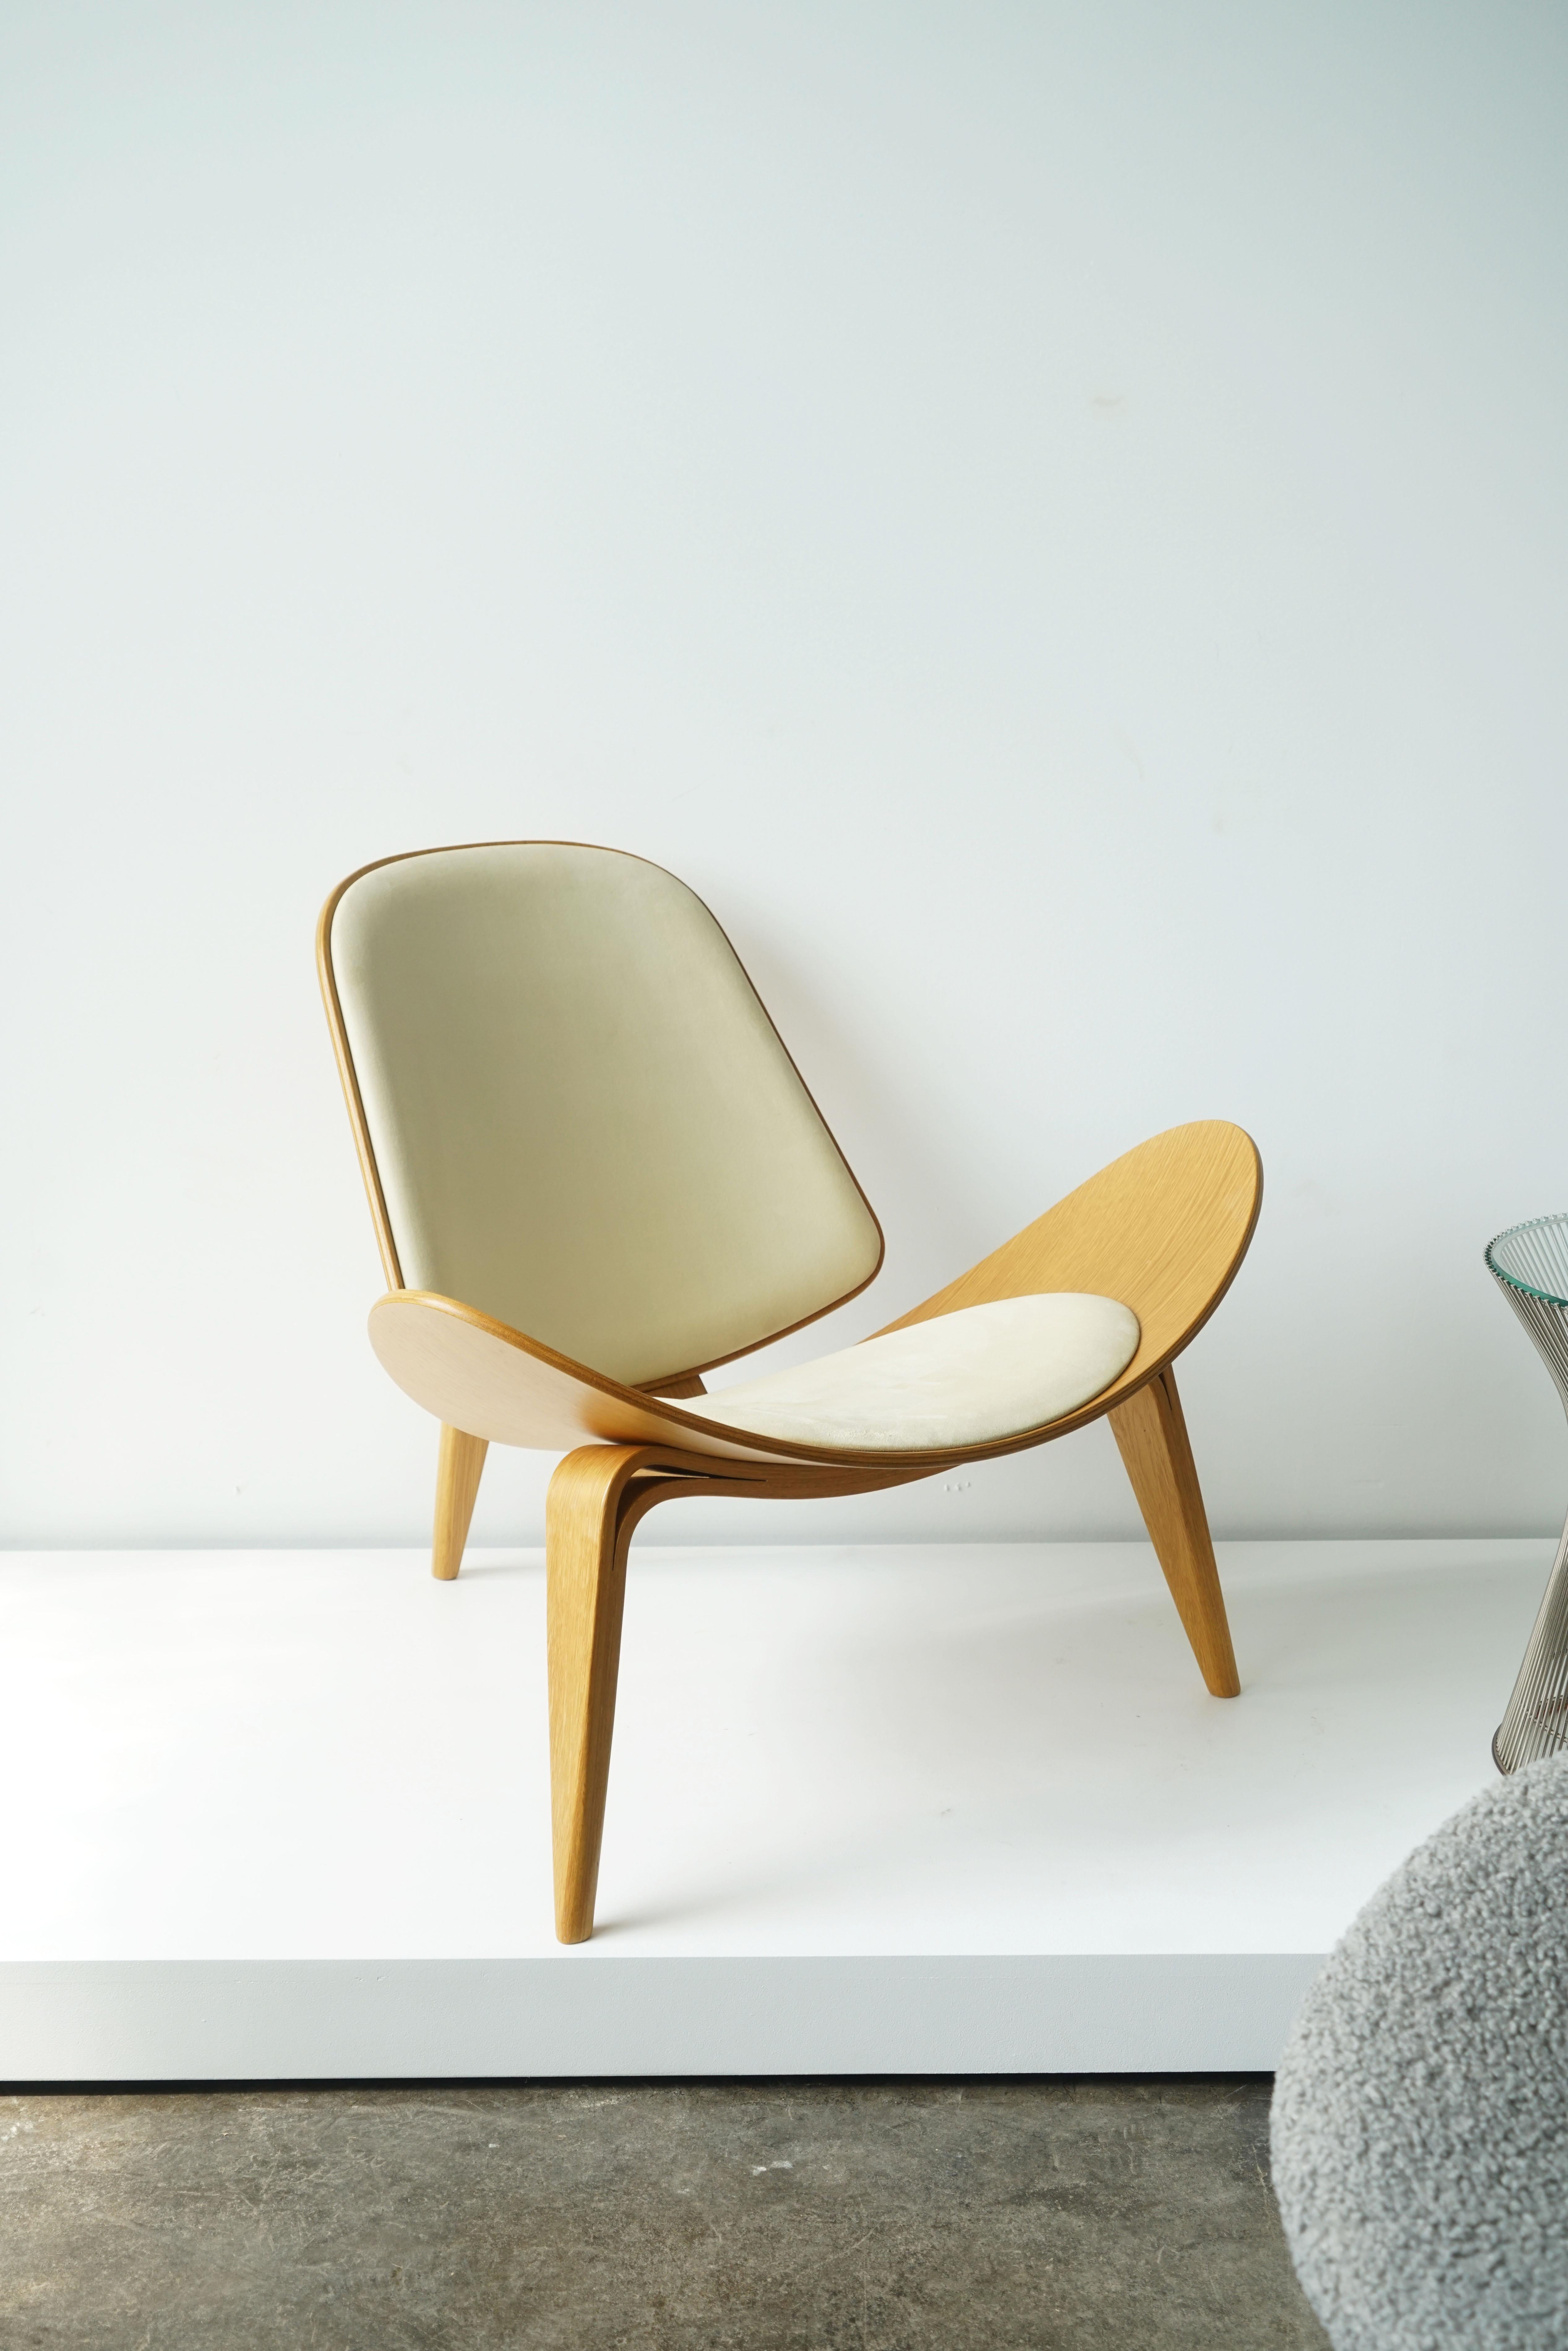 CH07 Shell Chair by Hans Wegner for Carl Hansen & Son
circa 2006
White Oak, suede leather

Sometimes called the “smiling chair,” Hans Wegner’s Shell Chair (originally designed in 1963) achieves a floating lightness with its wing-like seat and